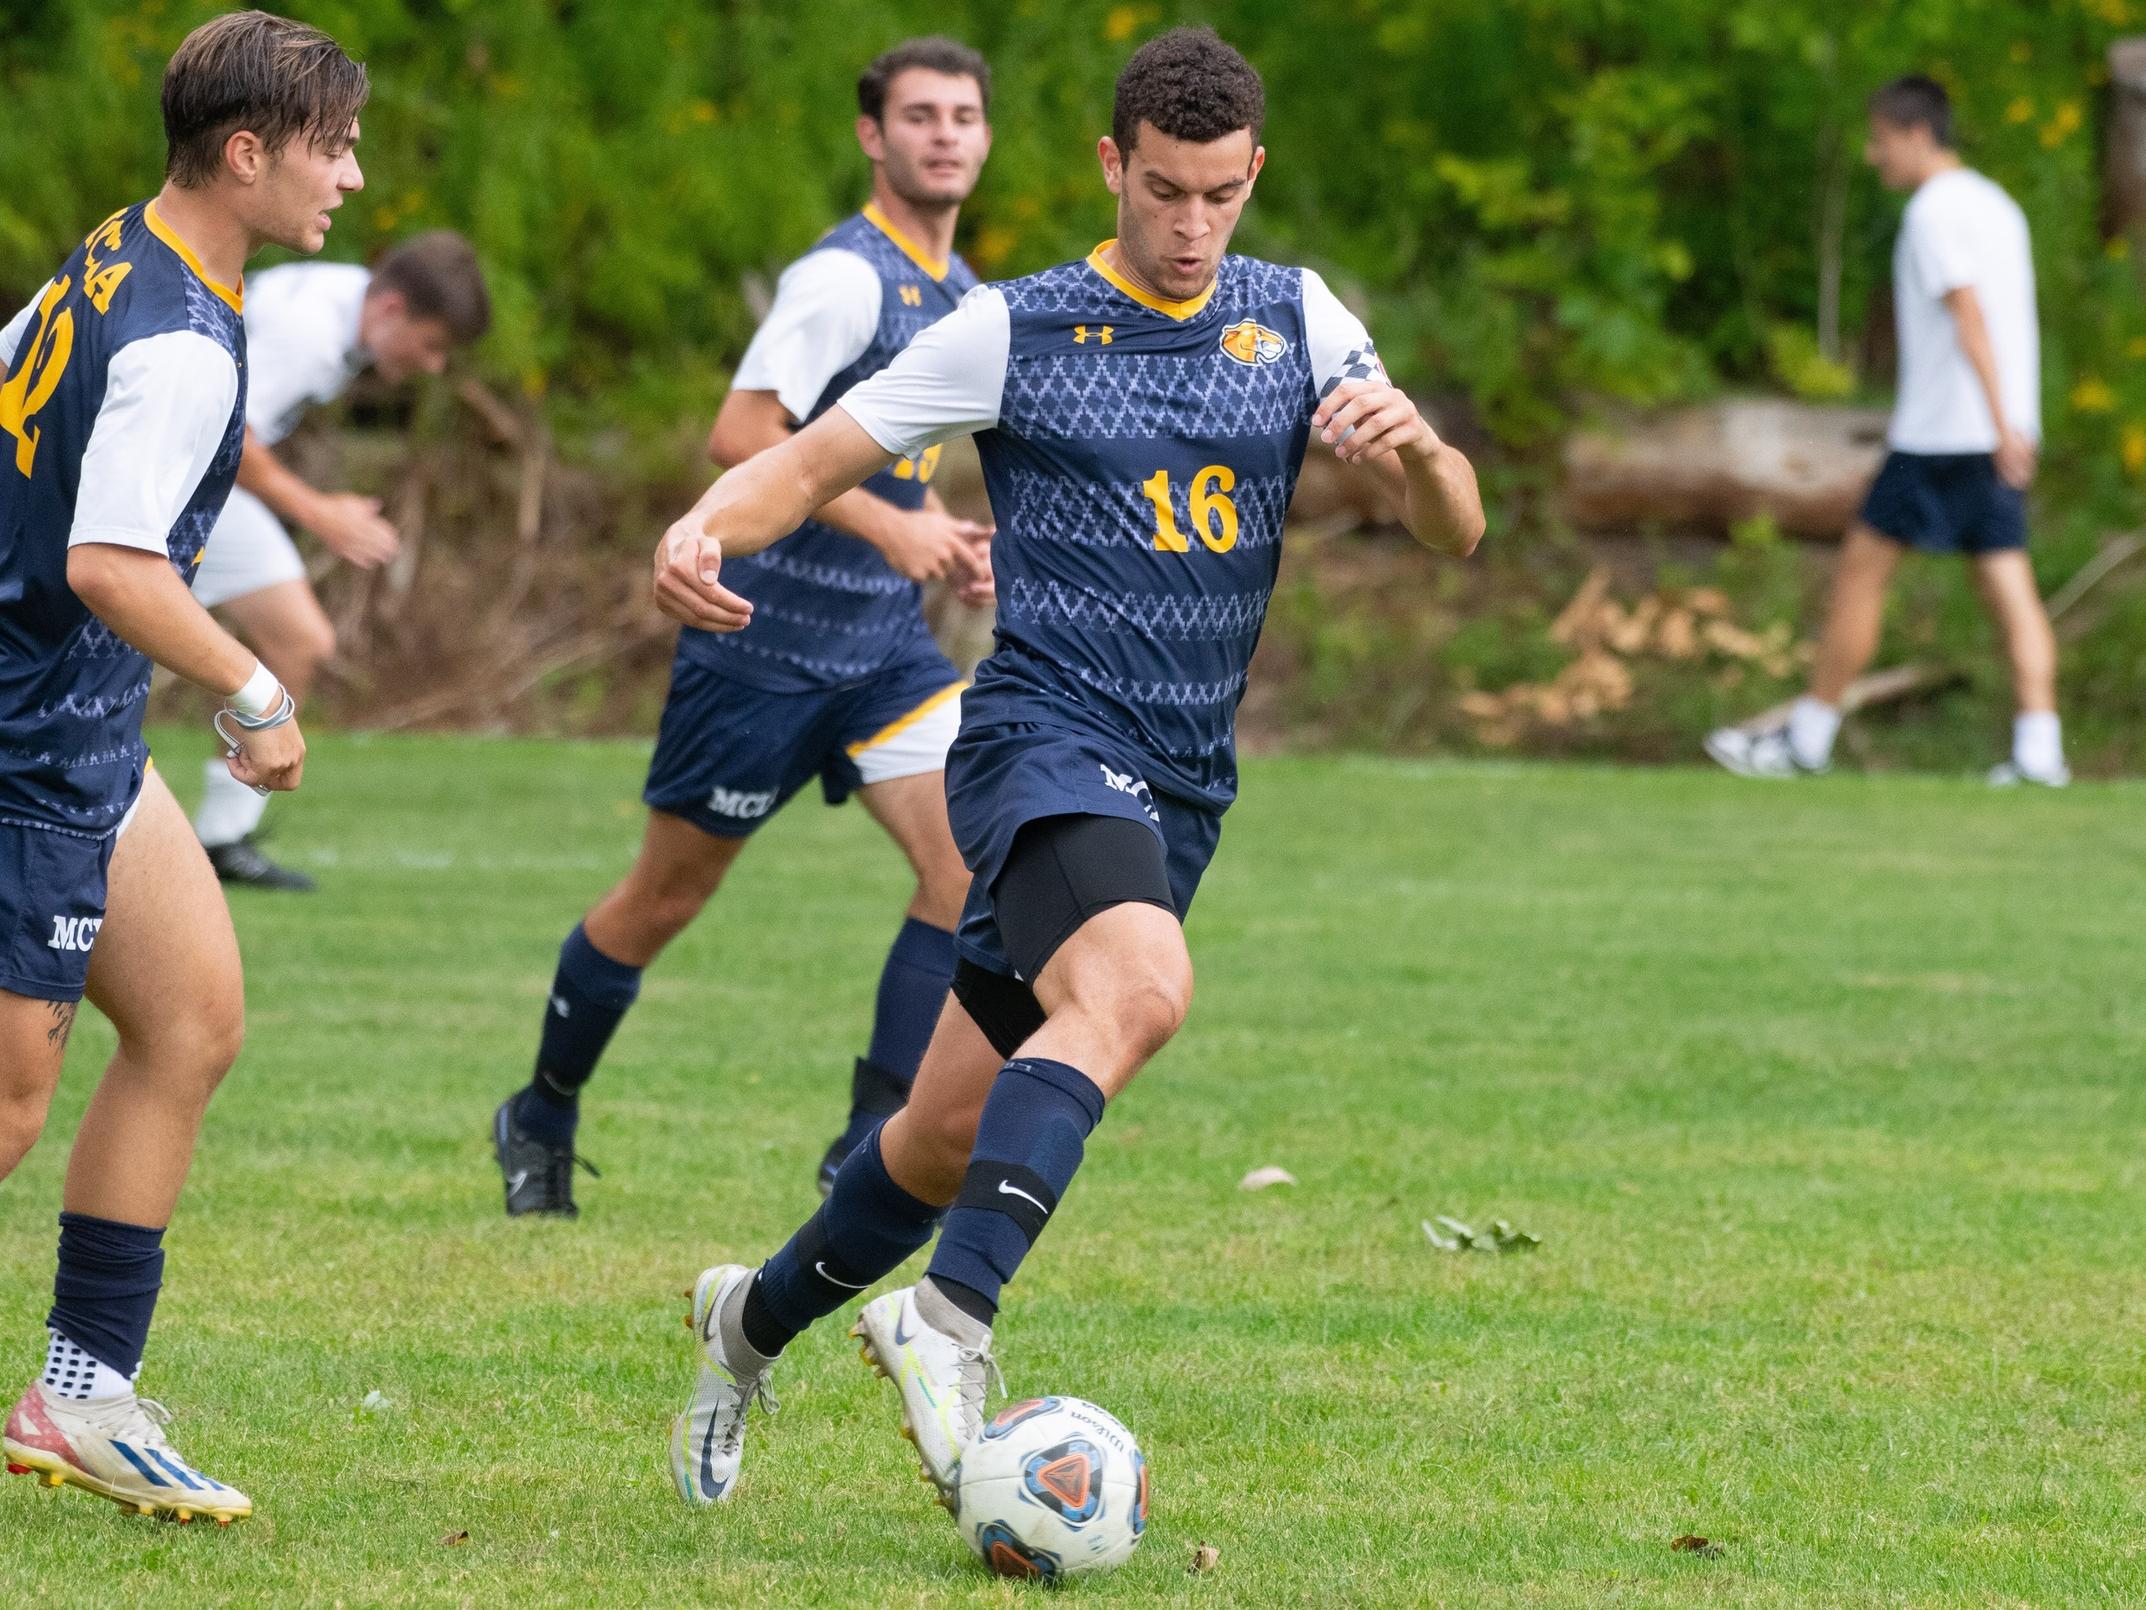 Marcos Lopez scored MCLA's lone goal today in the Trailblazers 4-1 loss to Nichols College.